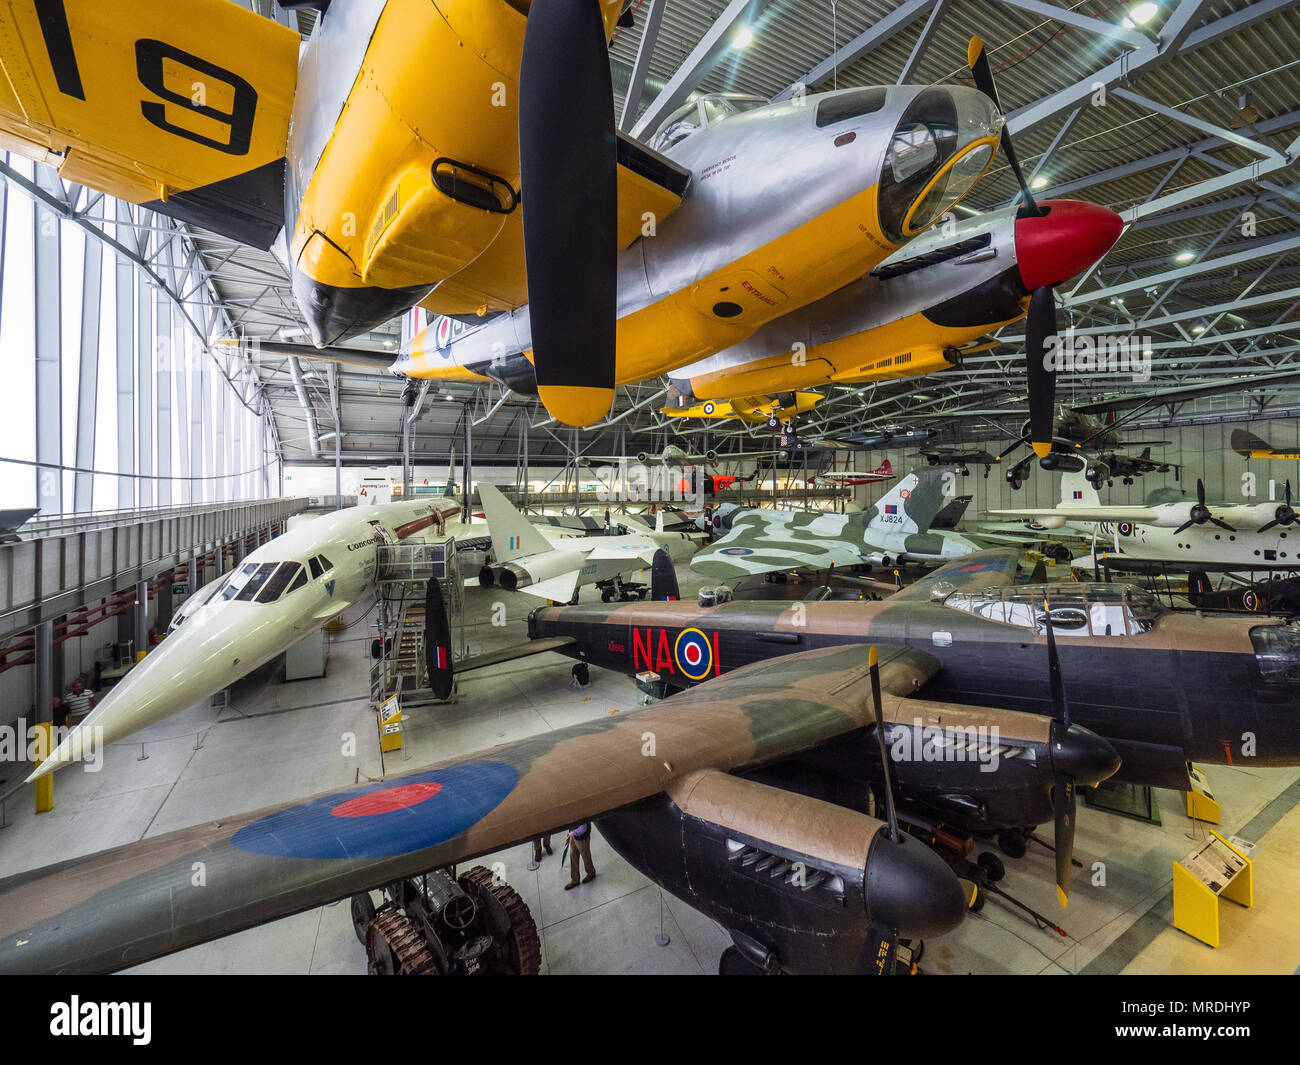 Duxford IWM - Imperial War Museum Duxford - the largest aviation museum in the UK - photo inside the Airspace Hanger which opened in 2008 Stock Photo